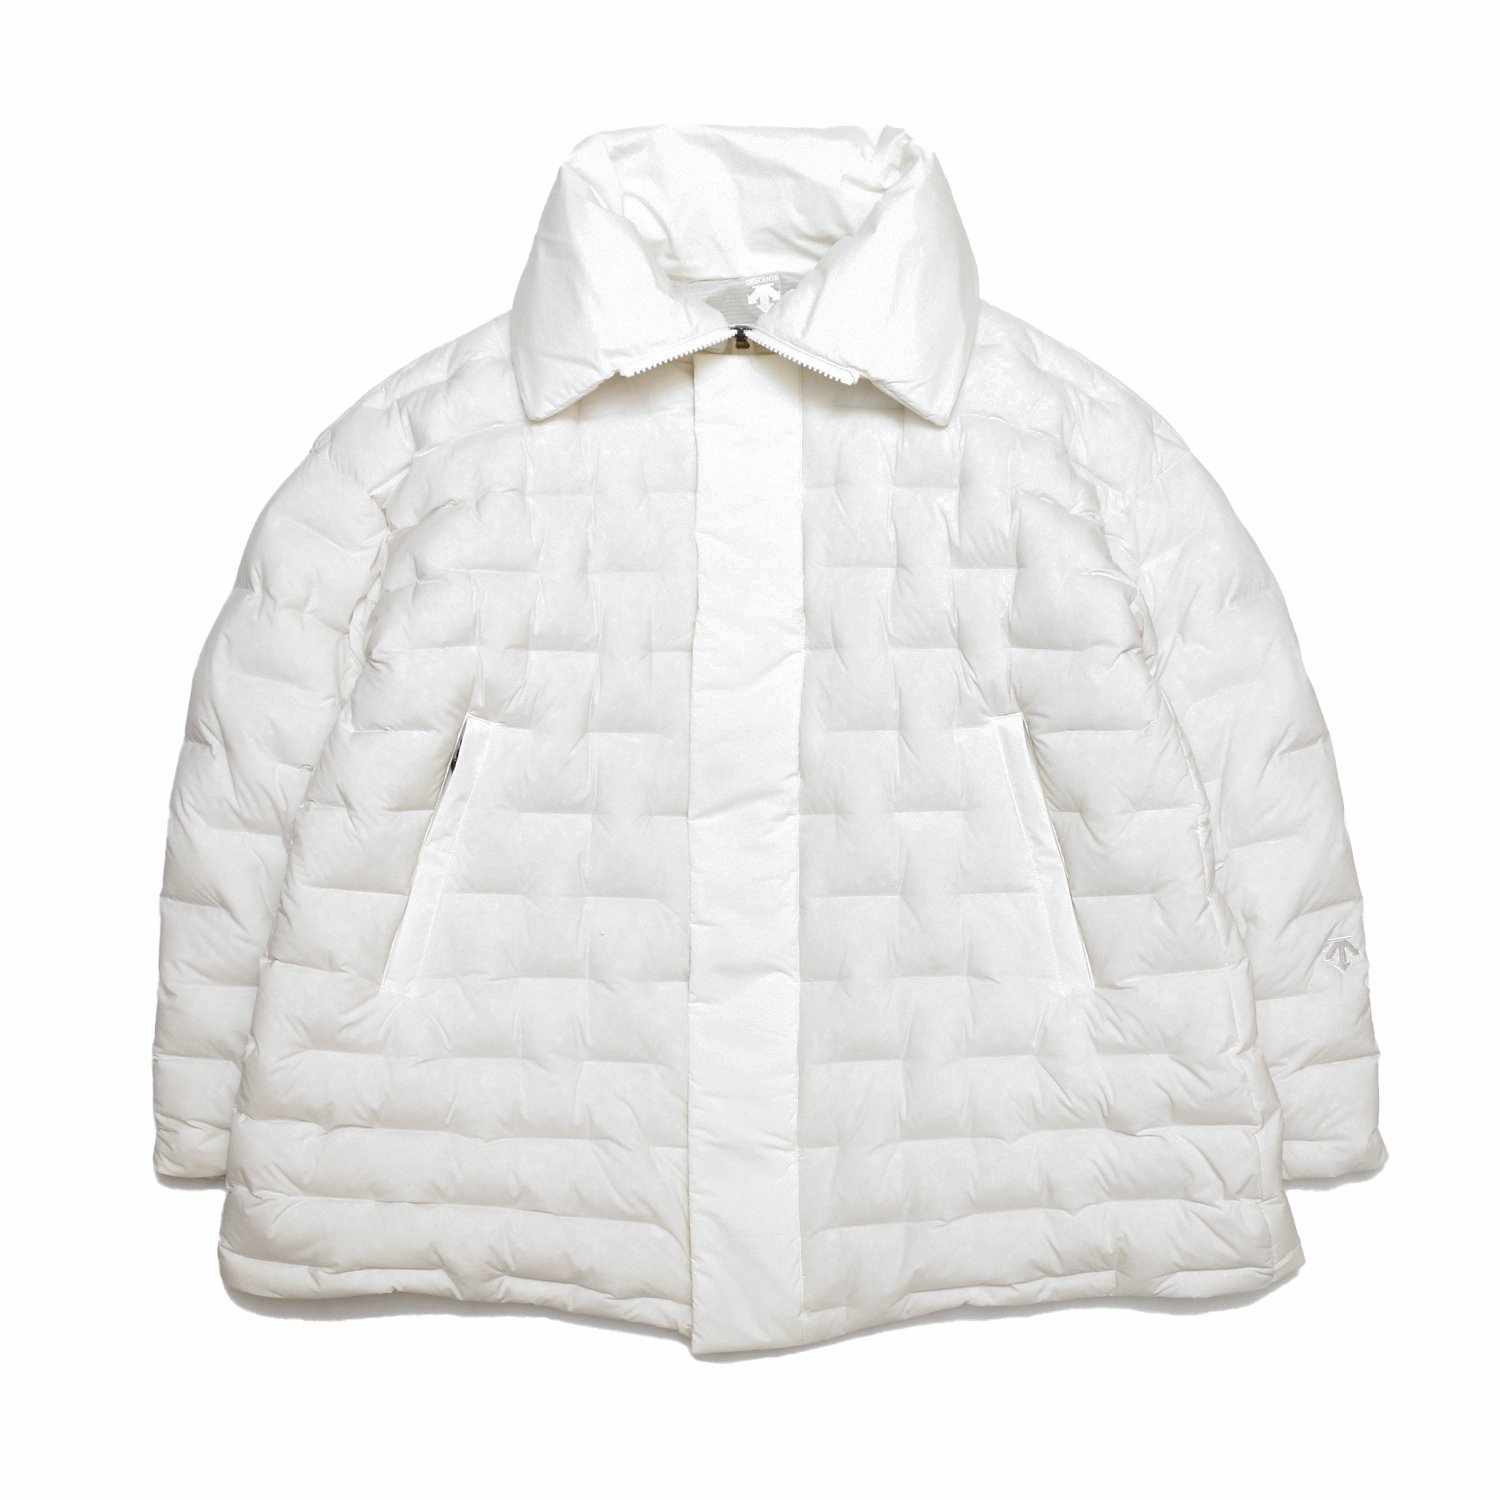 <img class='new_mark_img1' src='https://img.shop-pro.jp/img/new/icons8.gif' style='border:none;display:inline;margin:0px;padding:0px;width:auto;' />DESCENTE  ALWEL  / DIS DOWN HIGH COLLAR COAT